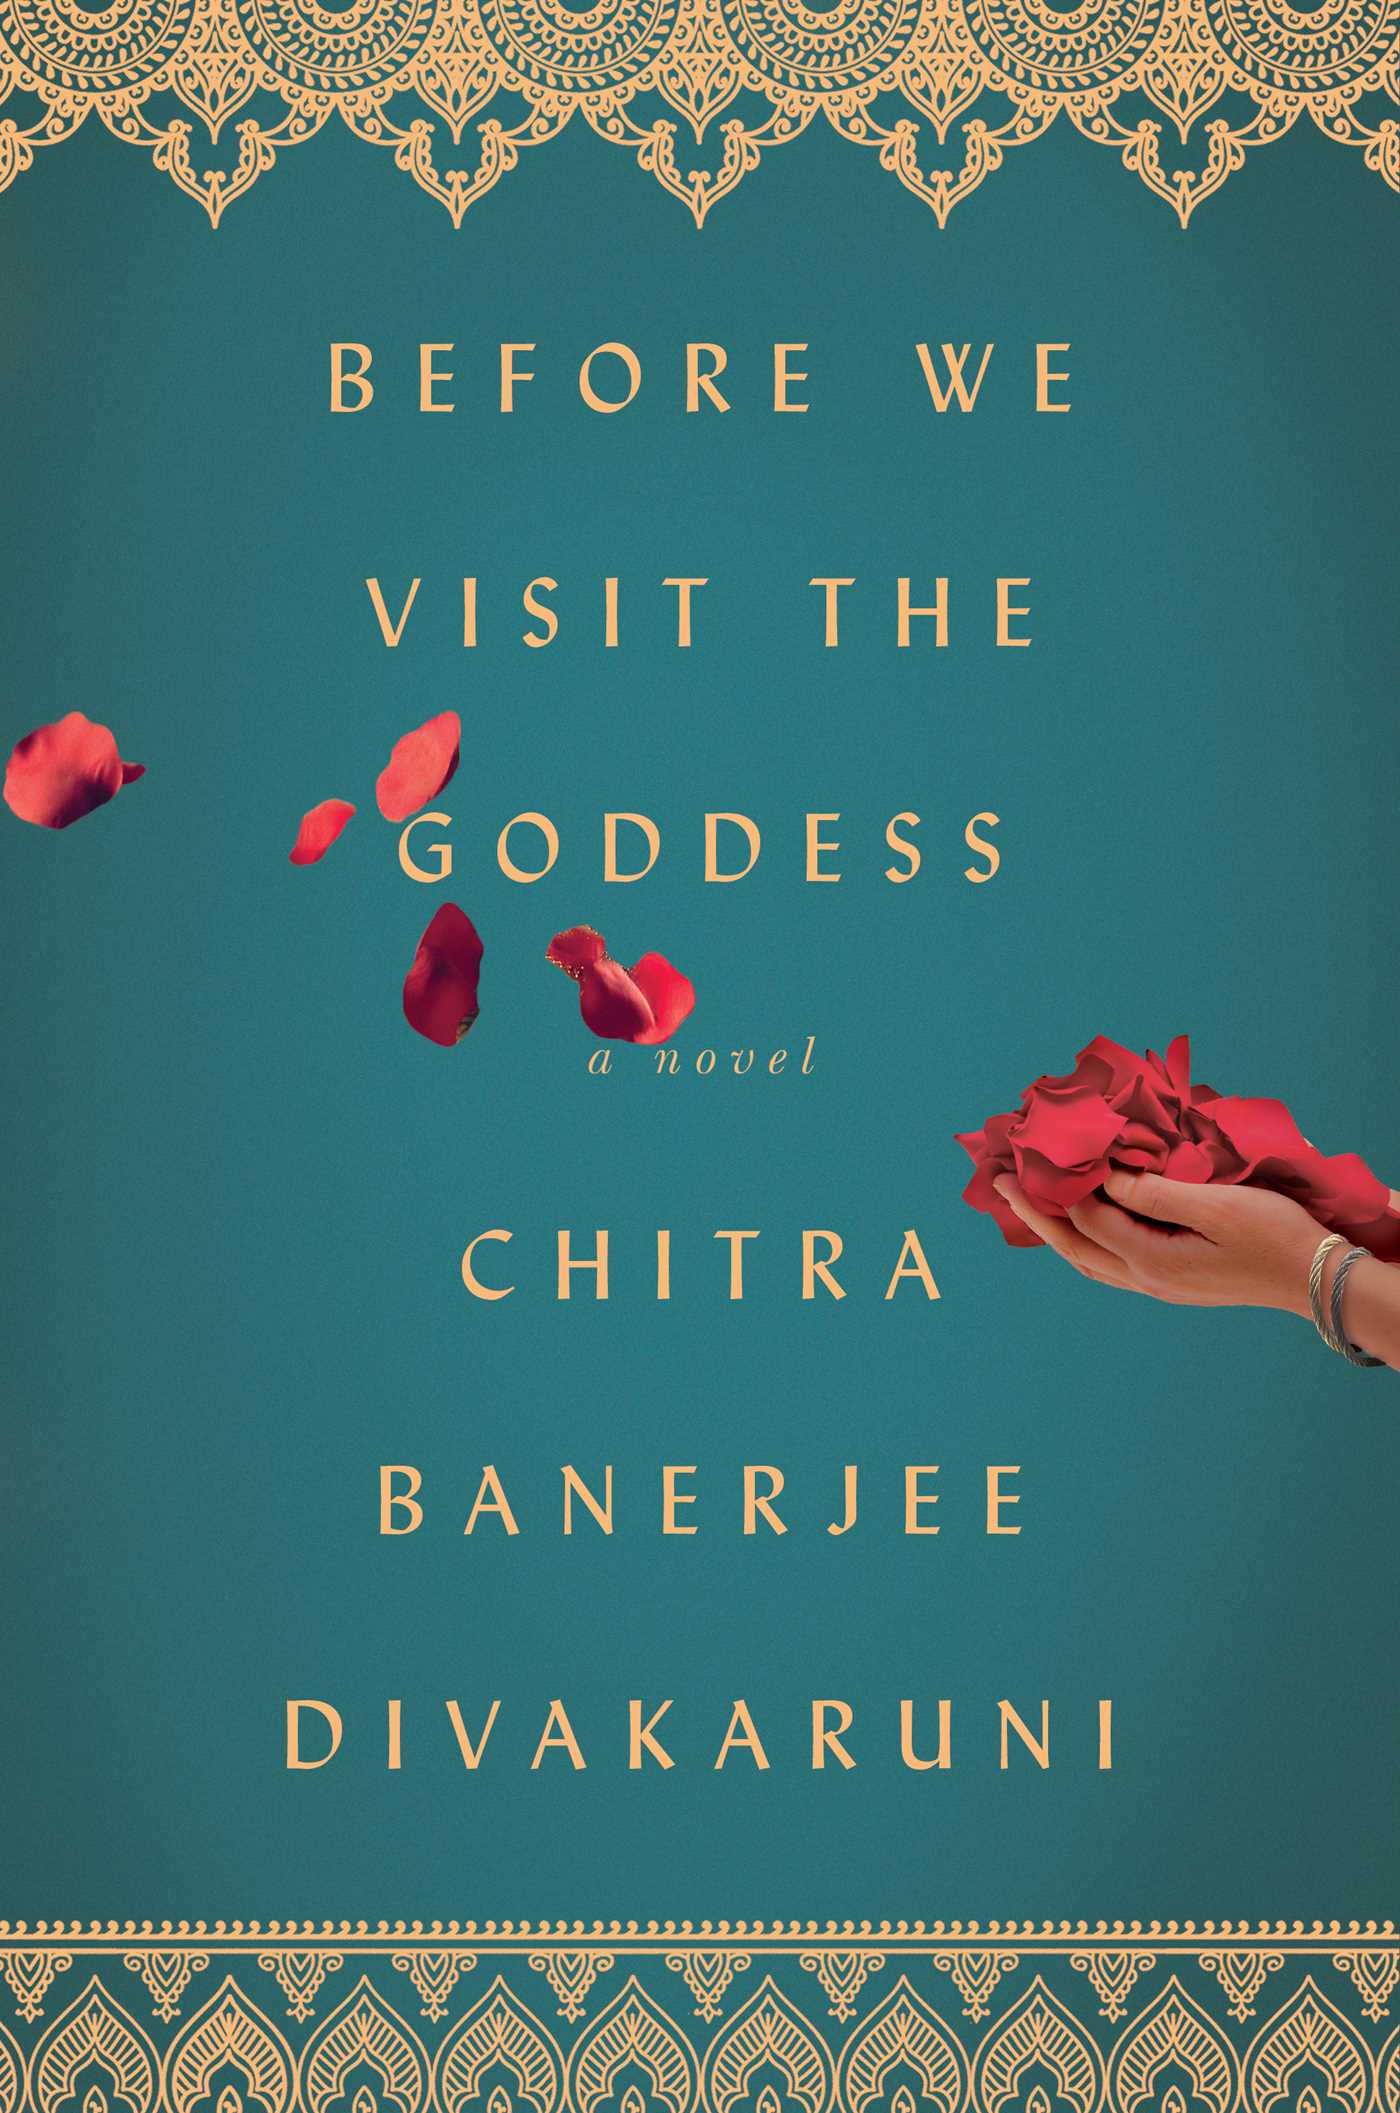 A Q&A with Chitra Banerjee Divakaruni